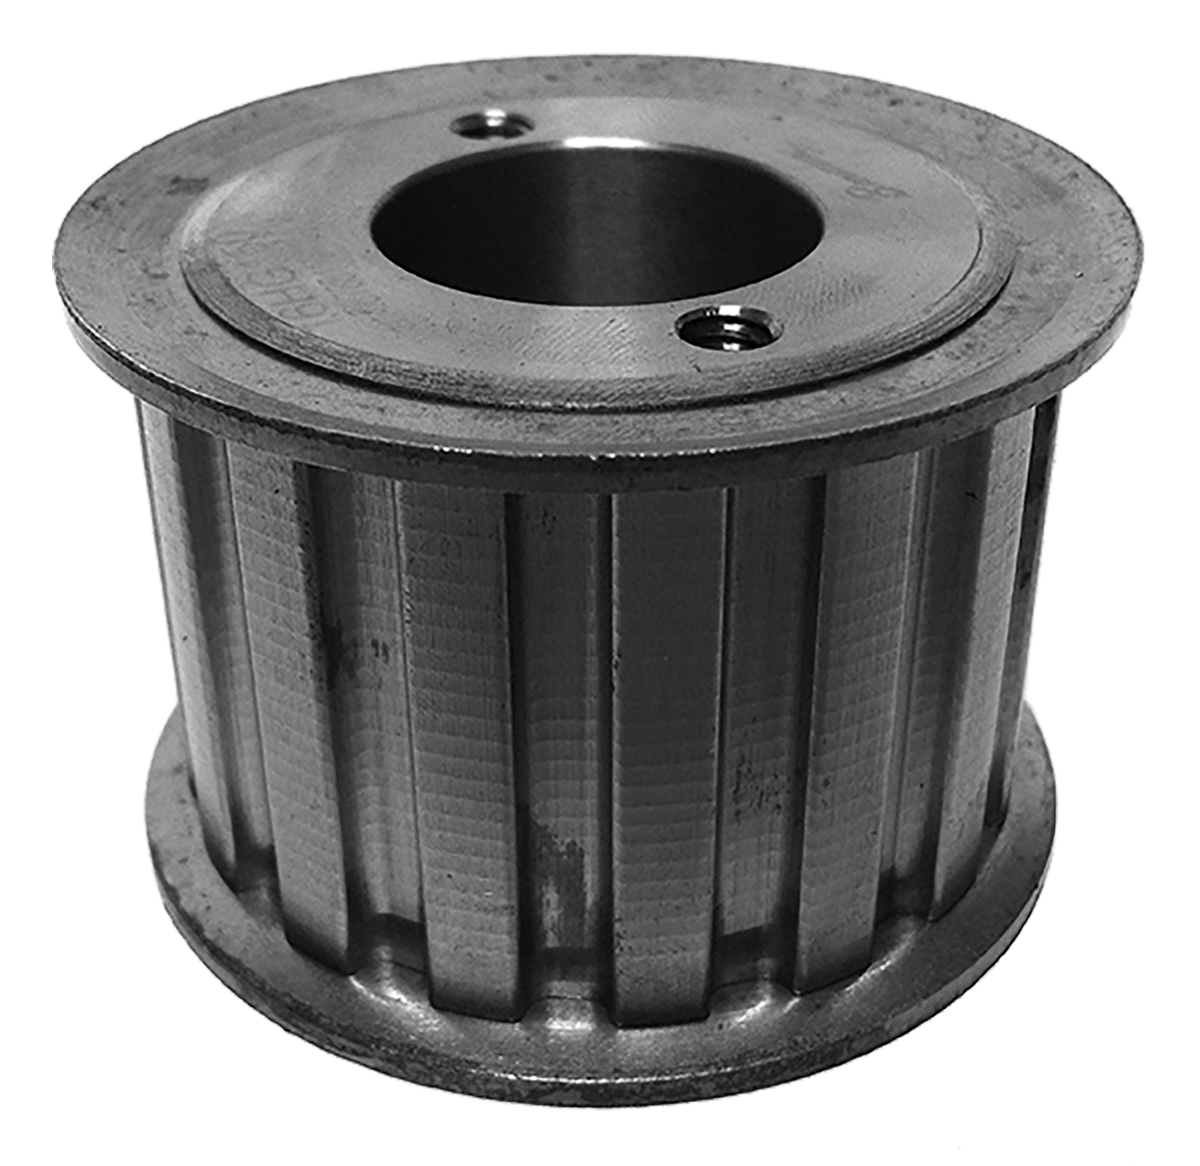 26HP150 - Cast Iron Imperial Pitch Pulleys